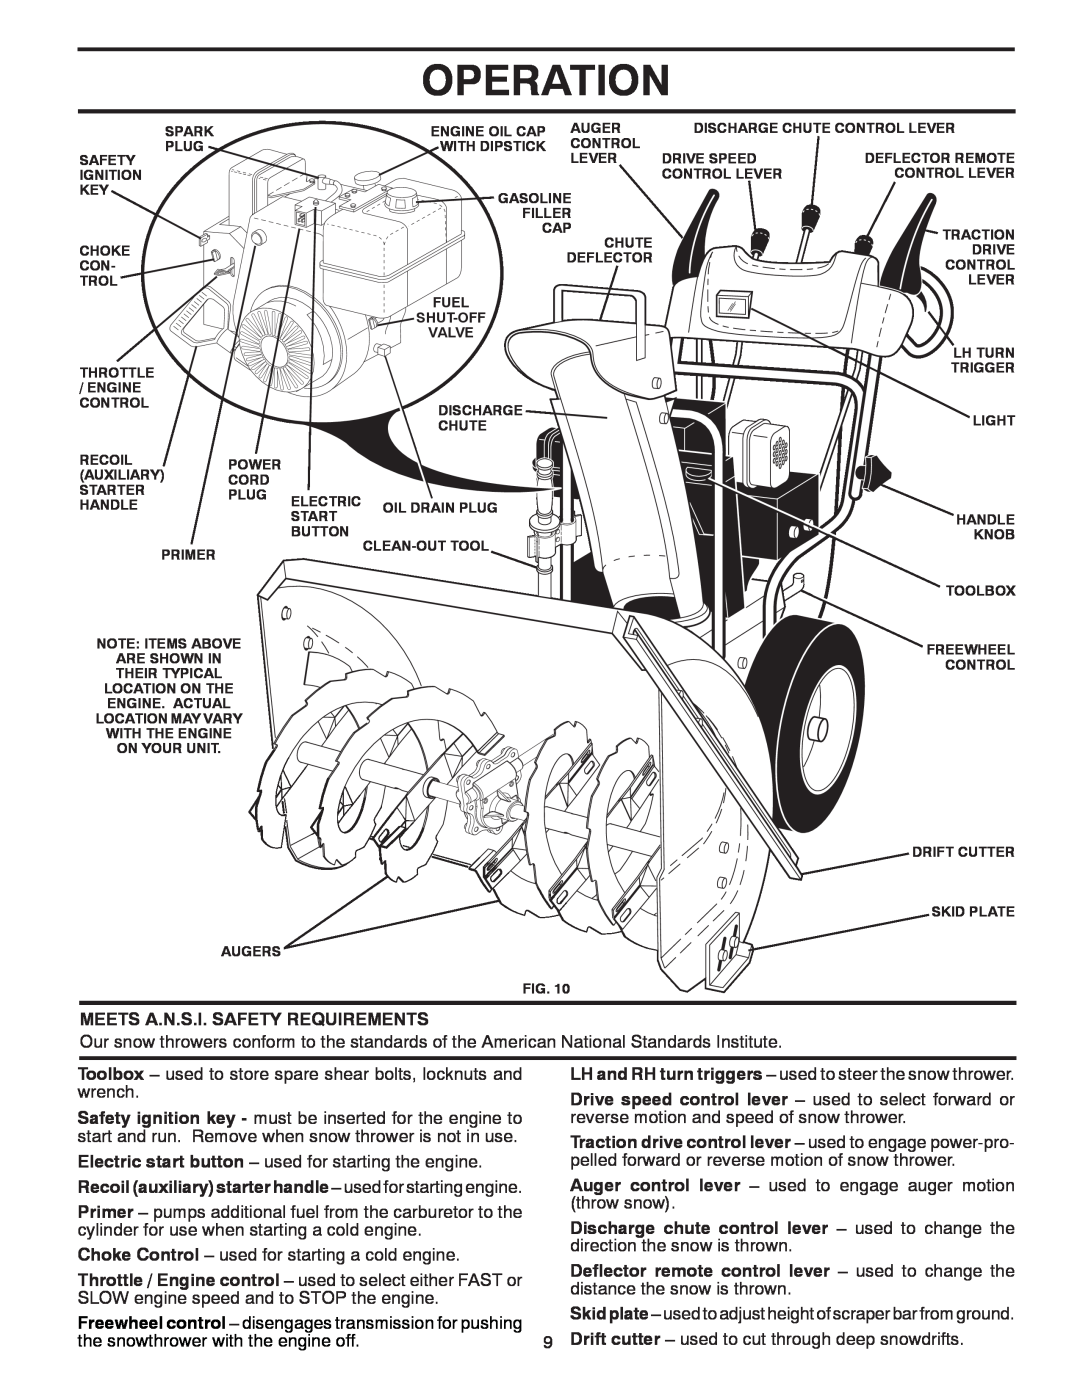 Poulan 96198000901 Operation, Meets A.N.S.I. Safety Requirements, Drive speed control lever - used to select forward or 